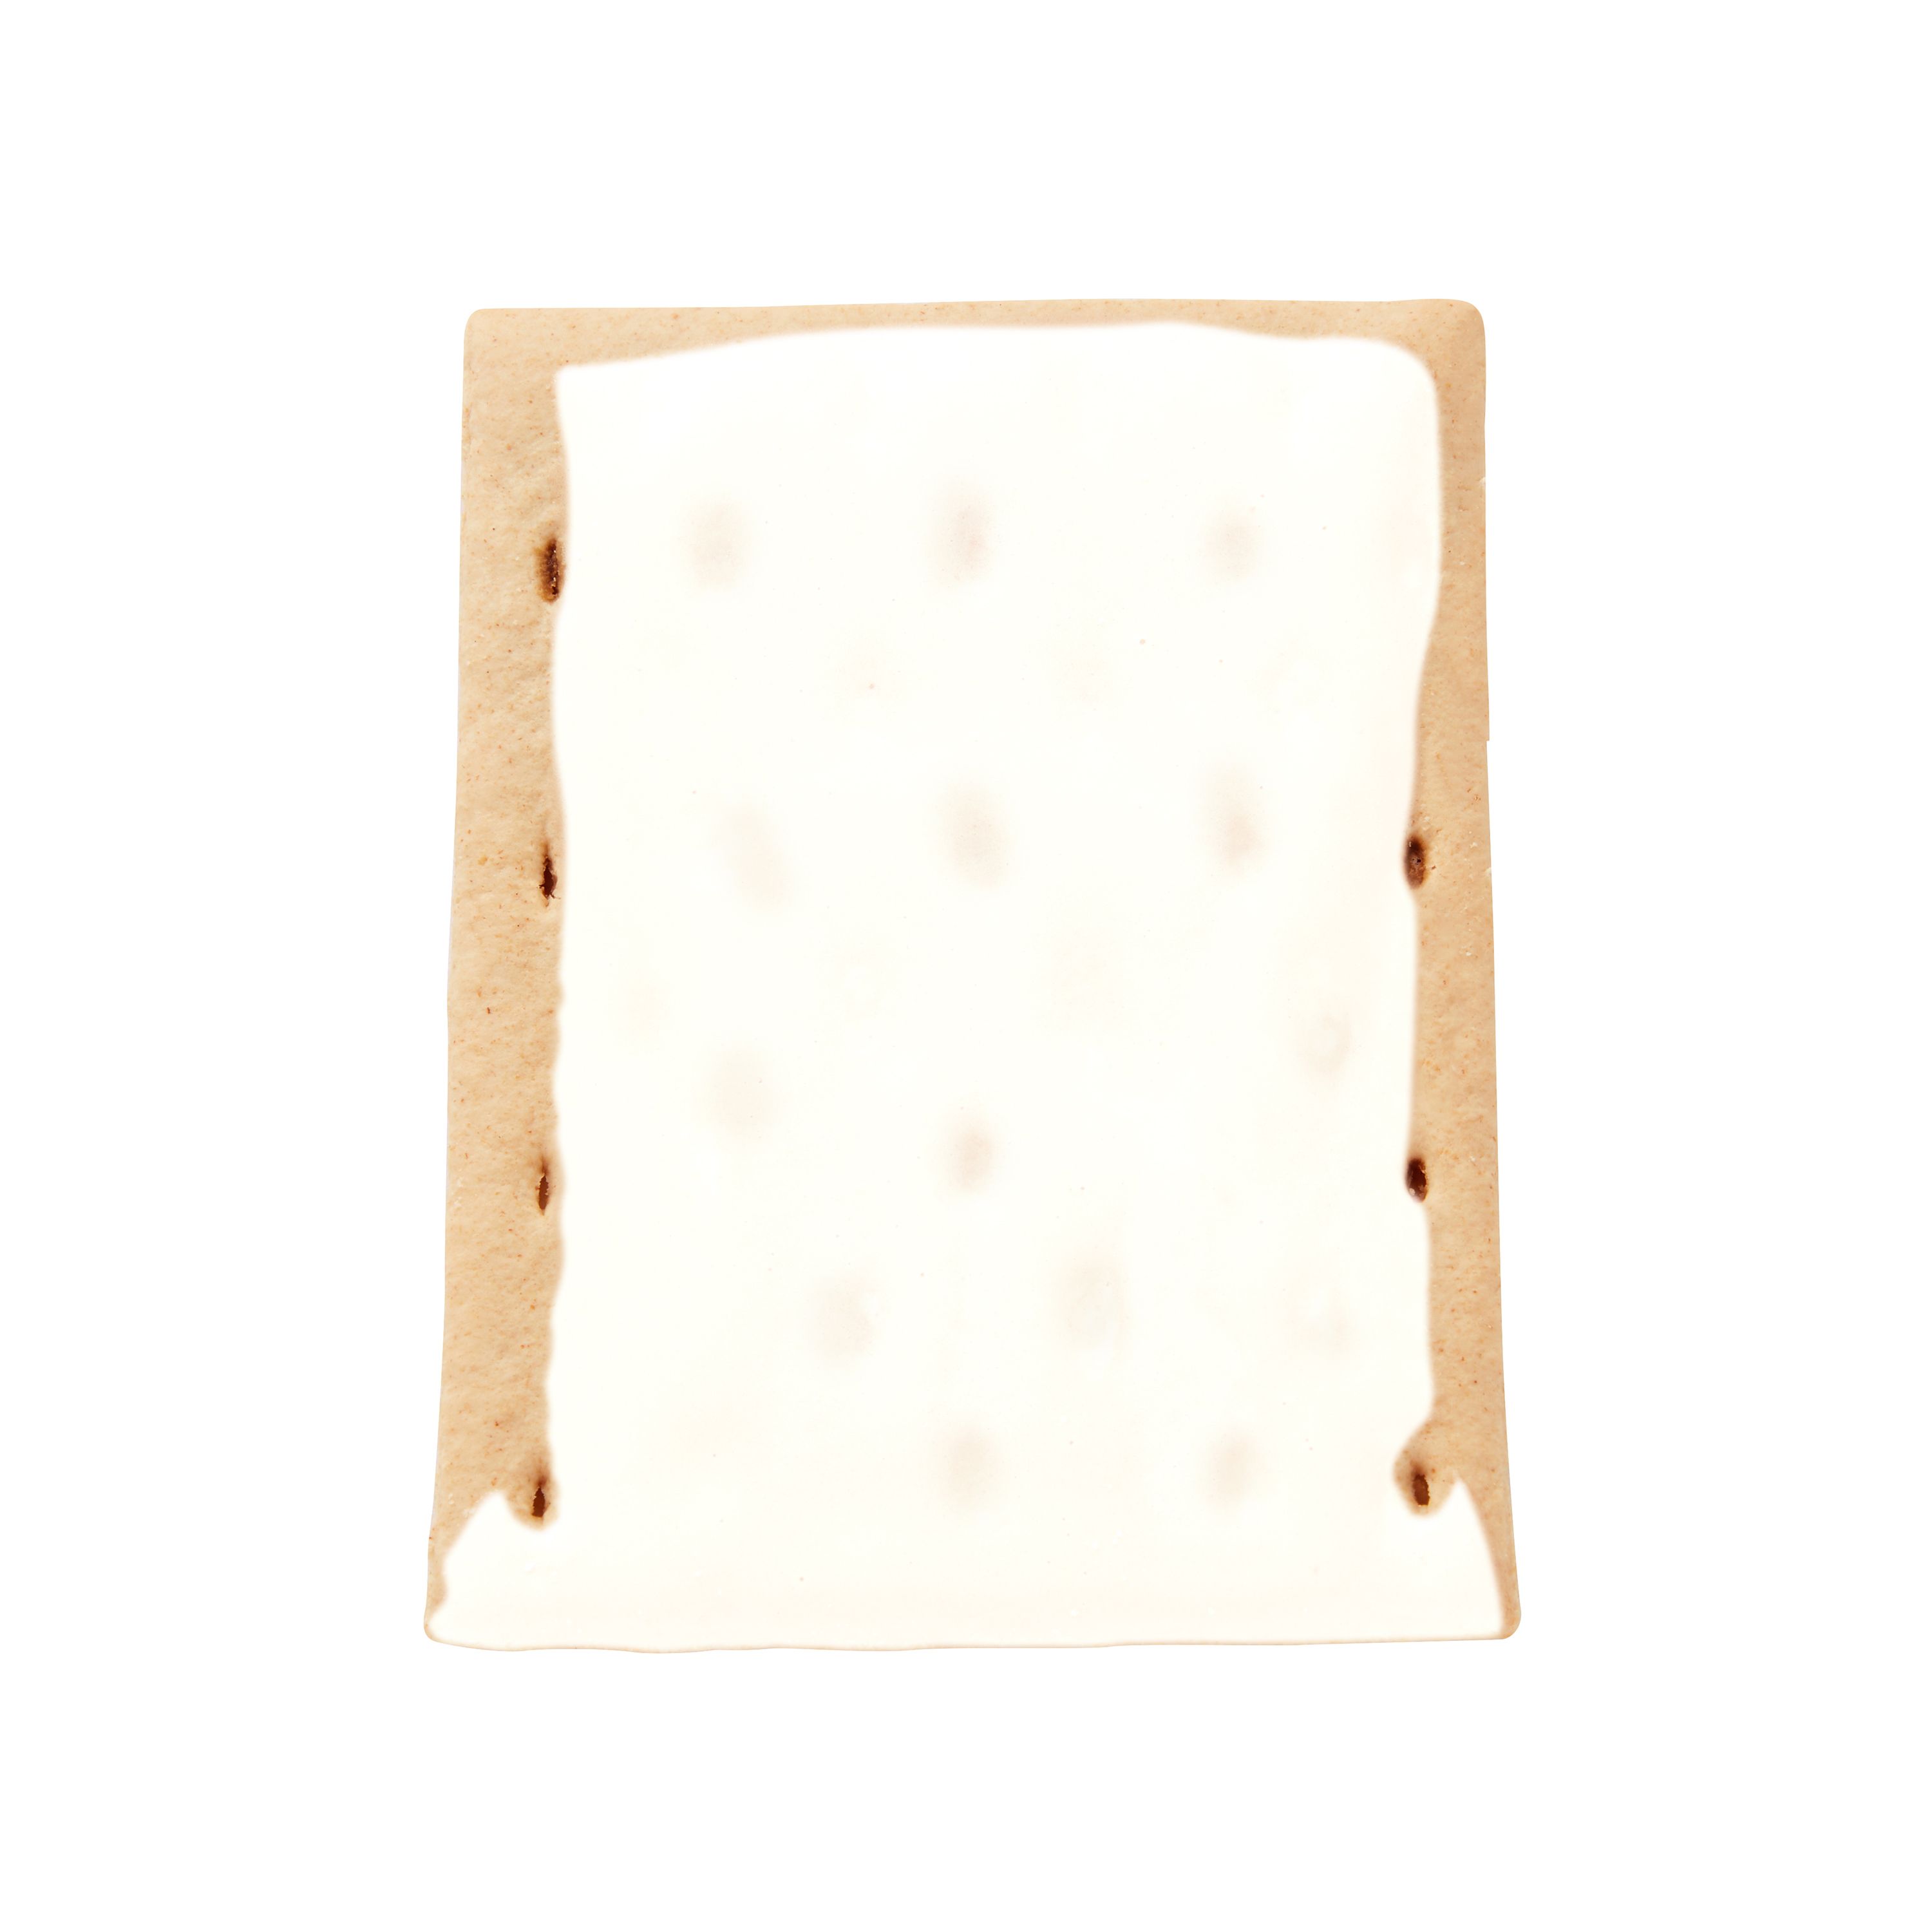 Pop-Tarts® Frosted Cinnamon Made with Whole Grain product image thumbnail 7